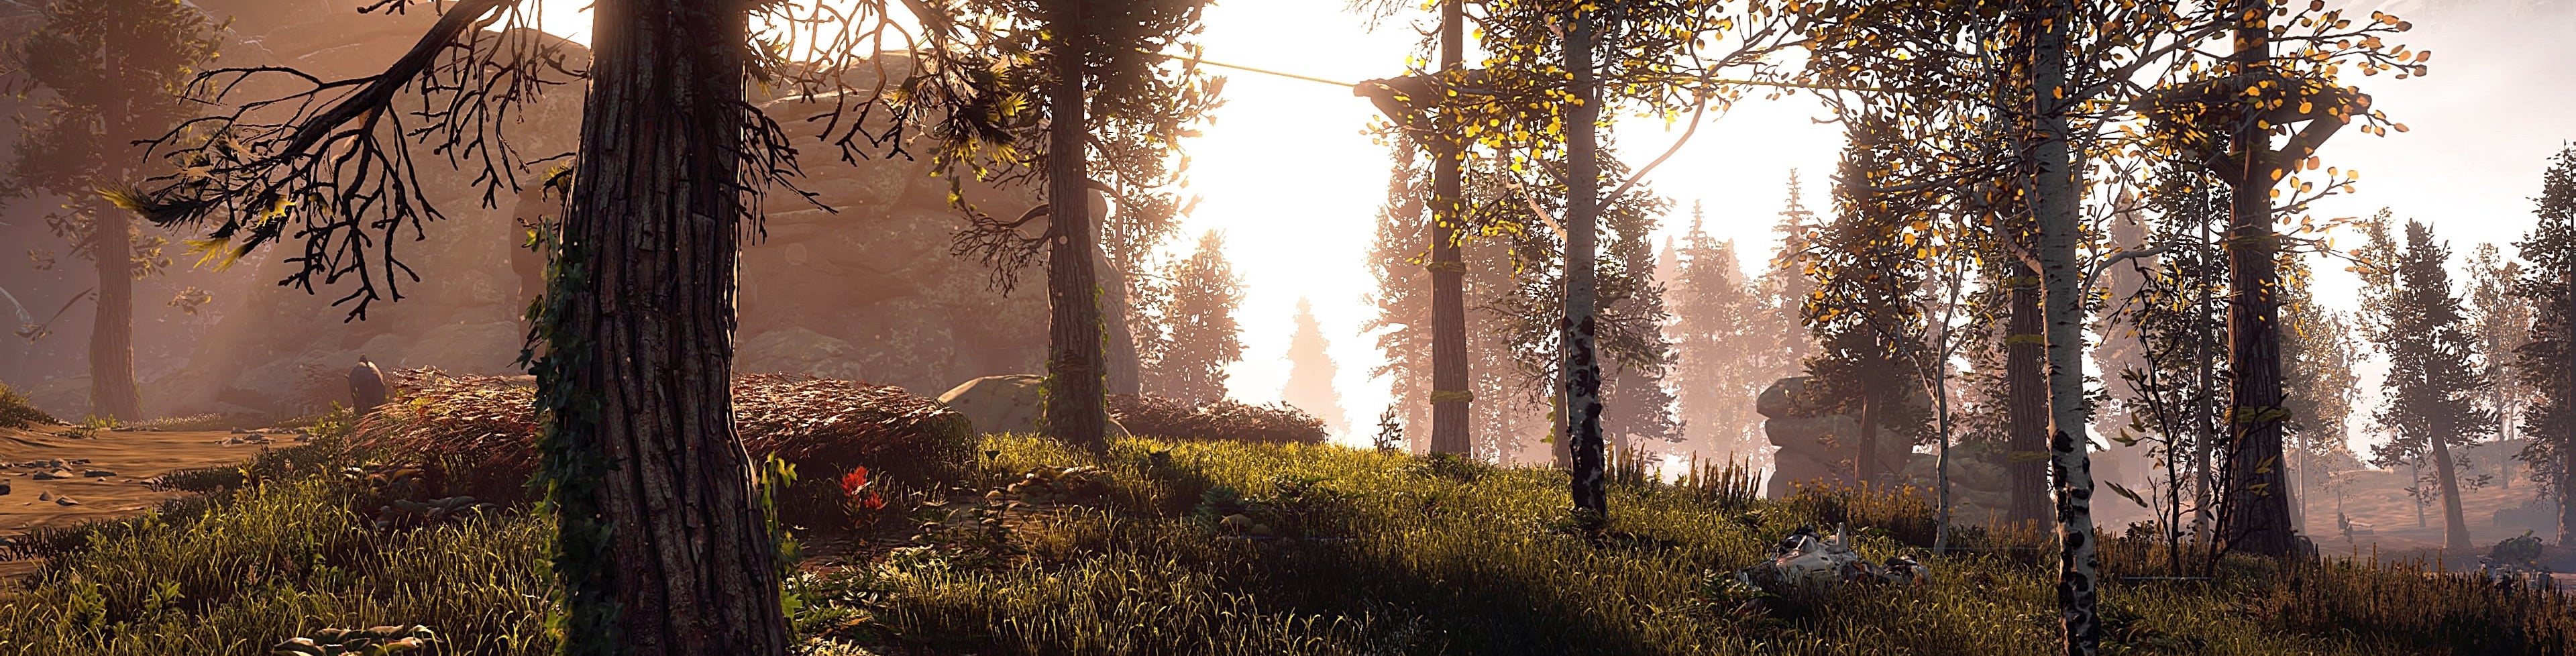 Image for The power of spring in Horizon Zero Dawn, Everybody's Gone to the Rapture and The Last of Us